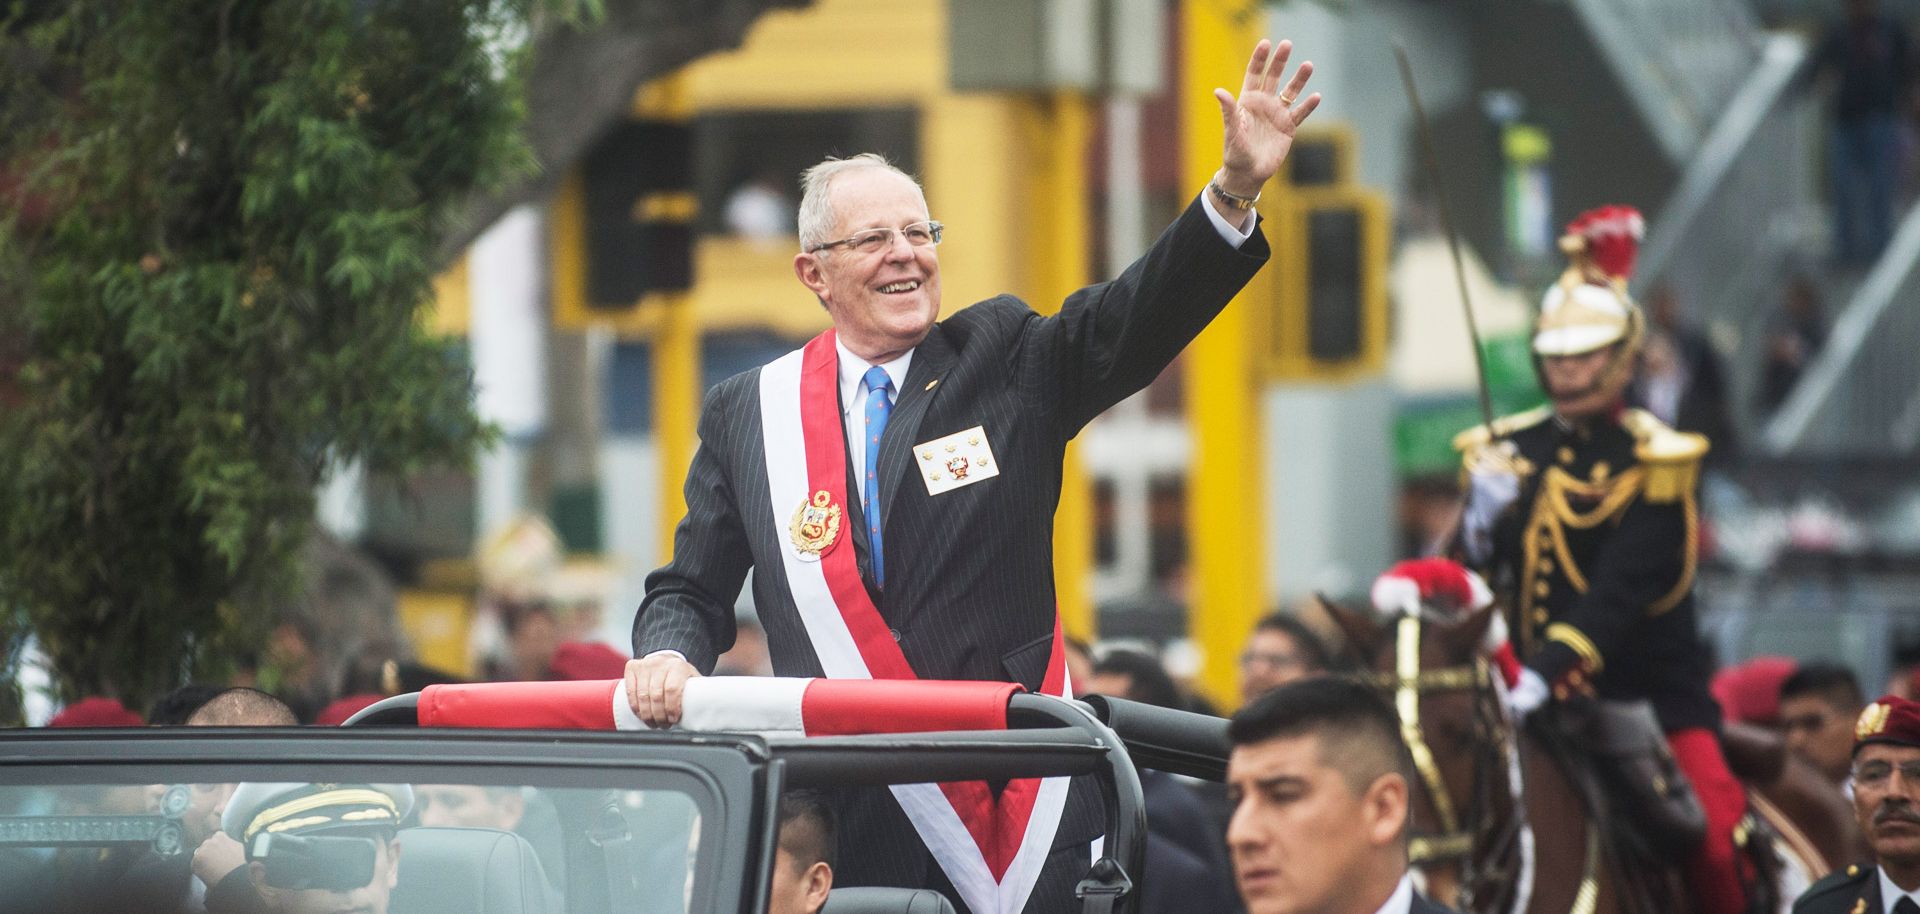 Peru's President Negotiates the Country's Problems